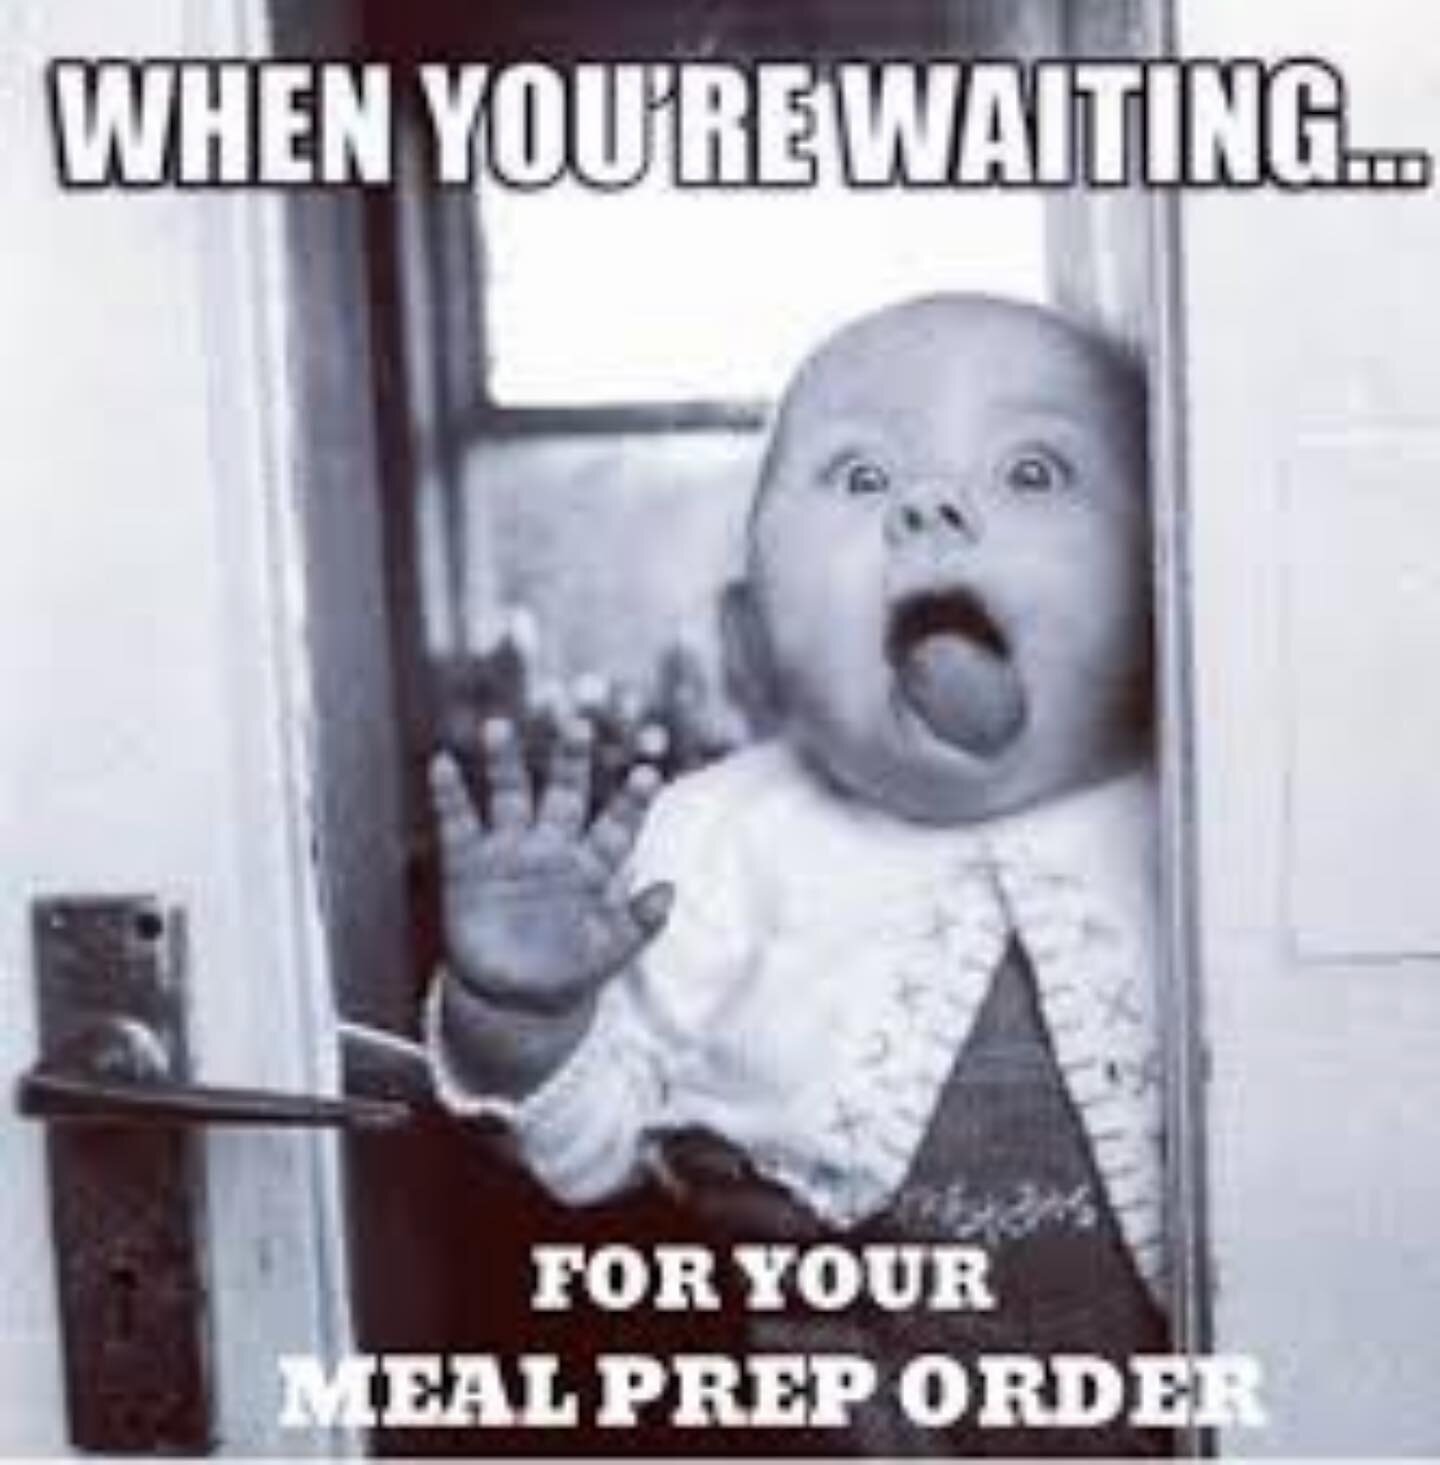 Prepz Meals will have you just like this 🤣🤣😄😄😆😆🙌🙌 remember to place your order Fridays by 9pm&hellip;
#fitness#mealprep#atlantamealprep#weightloss